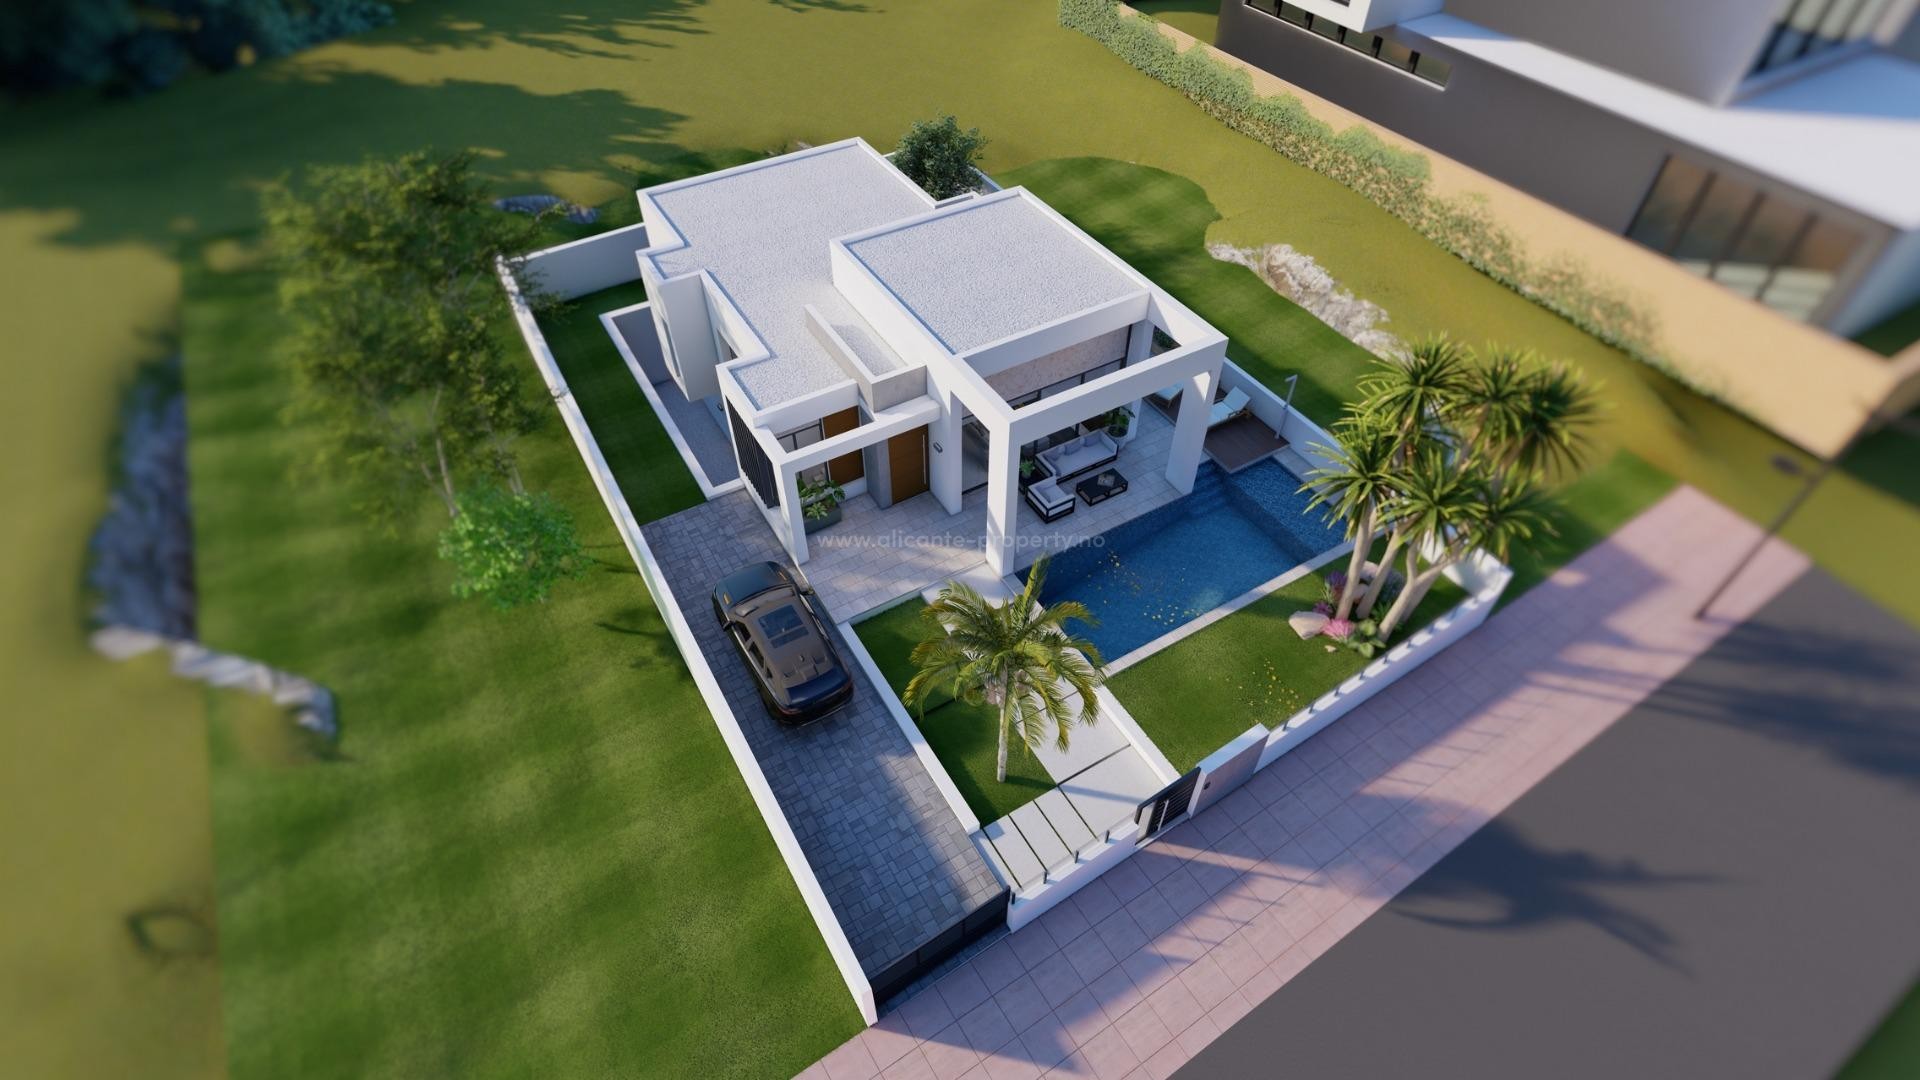 New built modern villa in Dona Pepa, Rojales, 3 bedrooms, 2 bathrooms, private garden with pool, terrace, cellar and parking